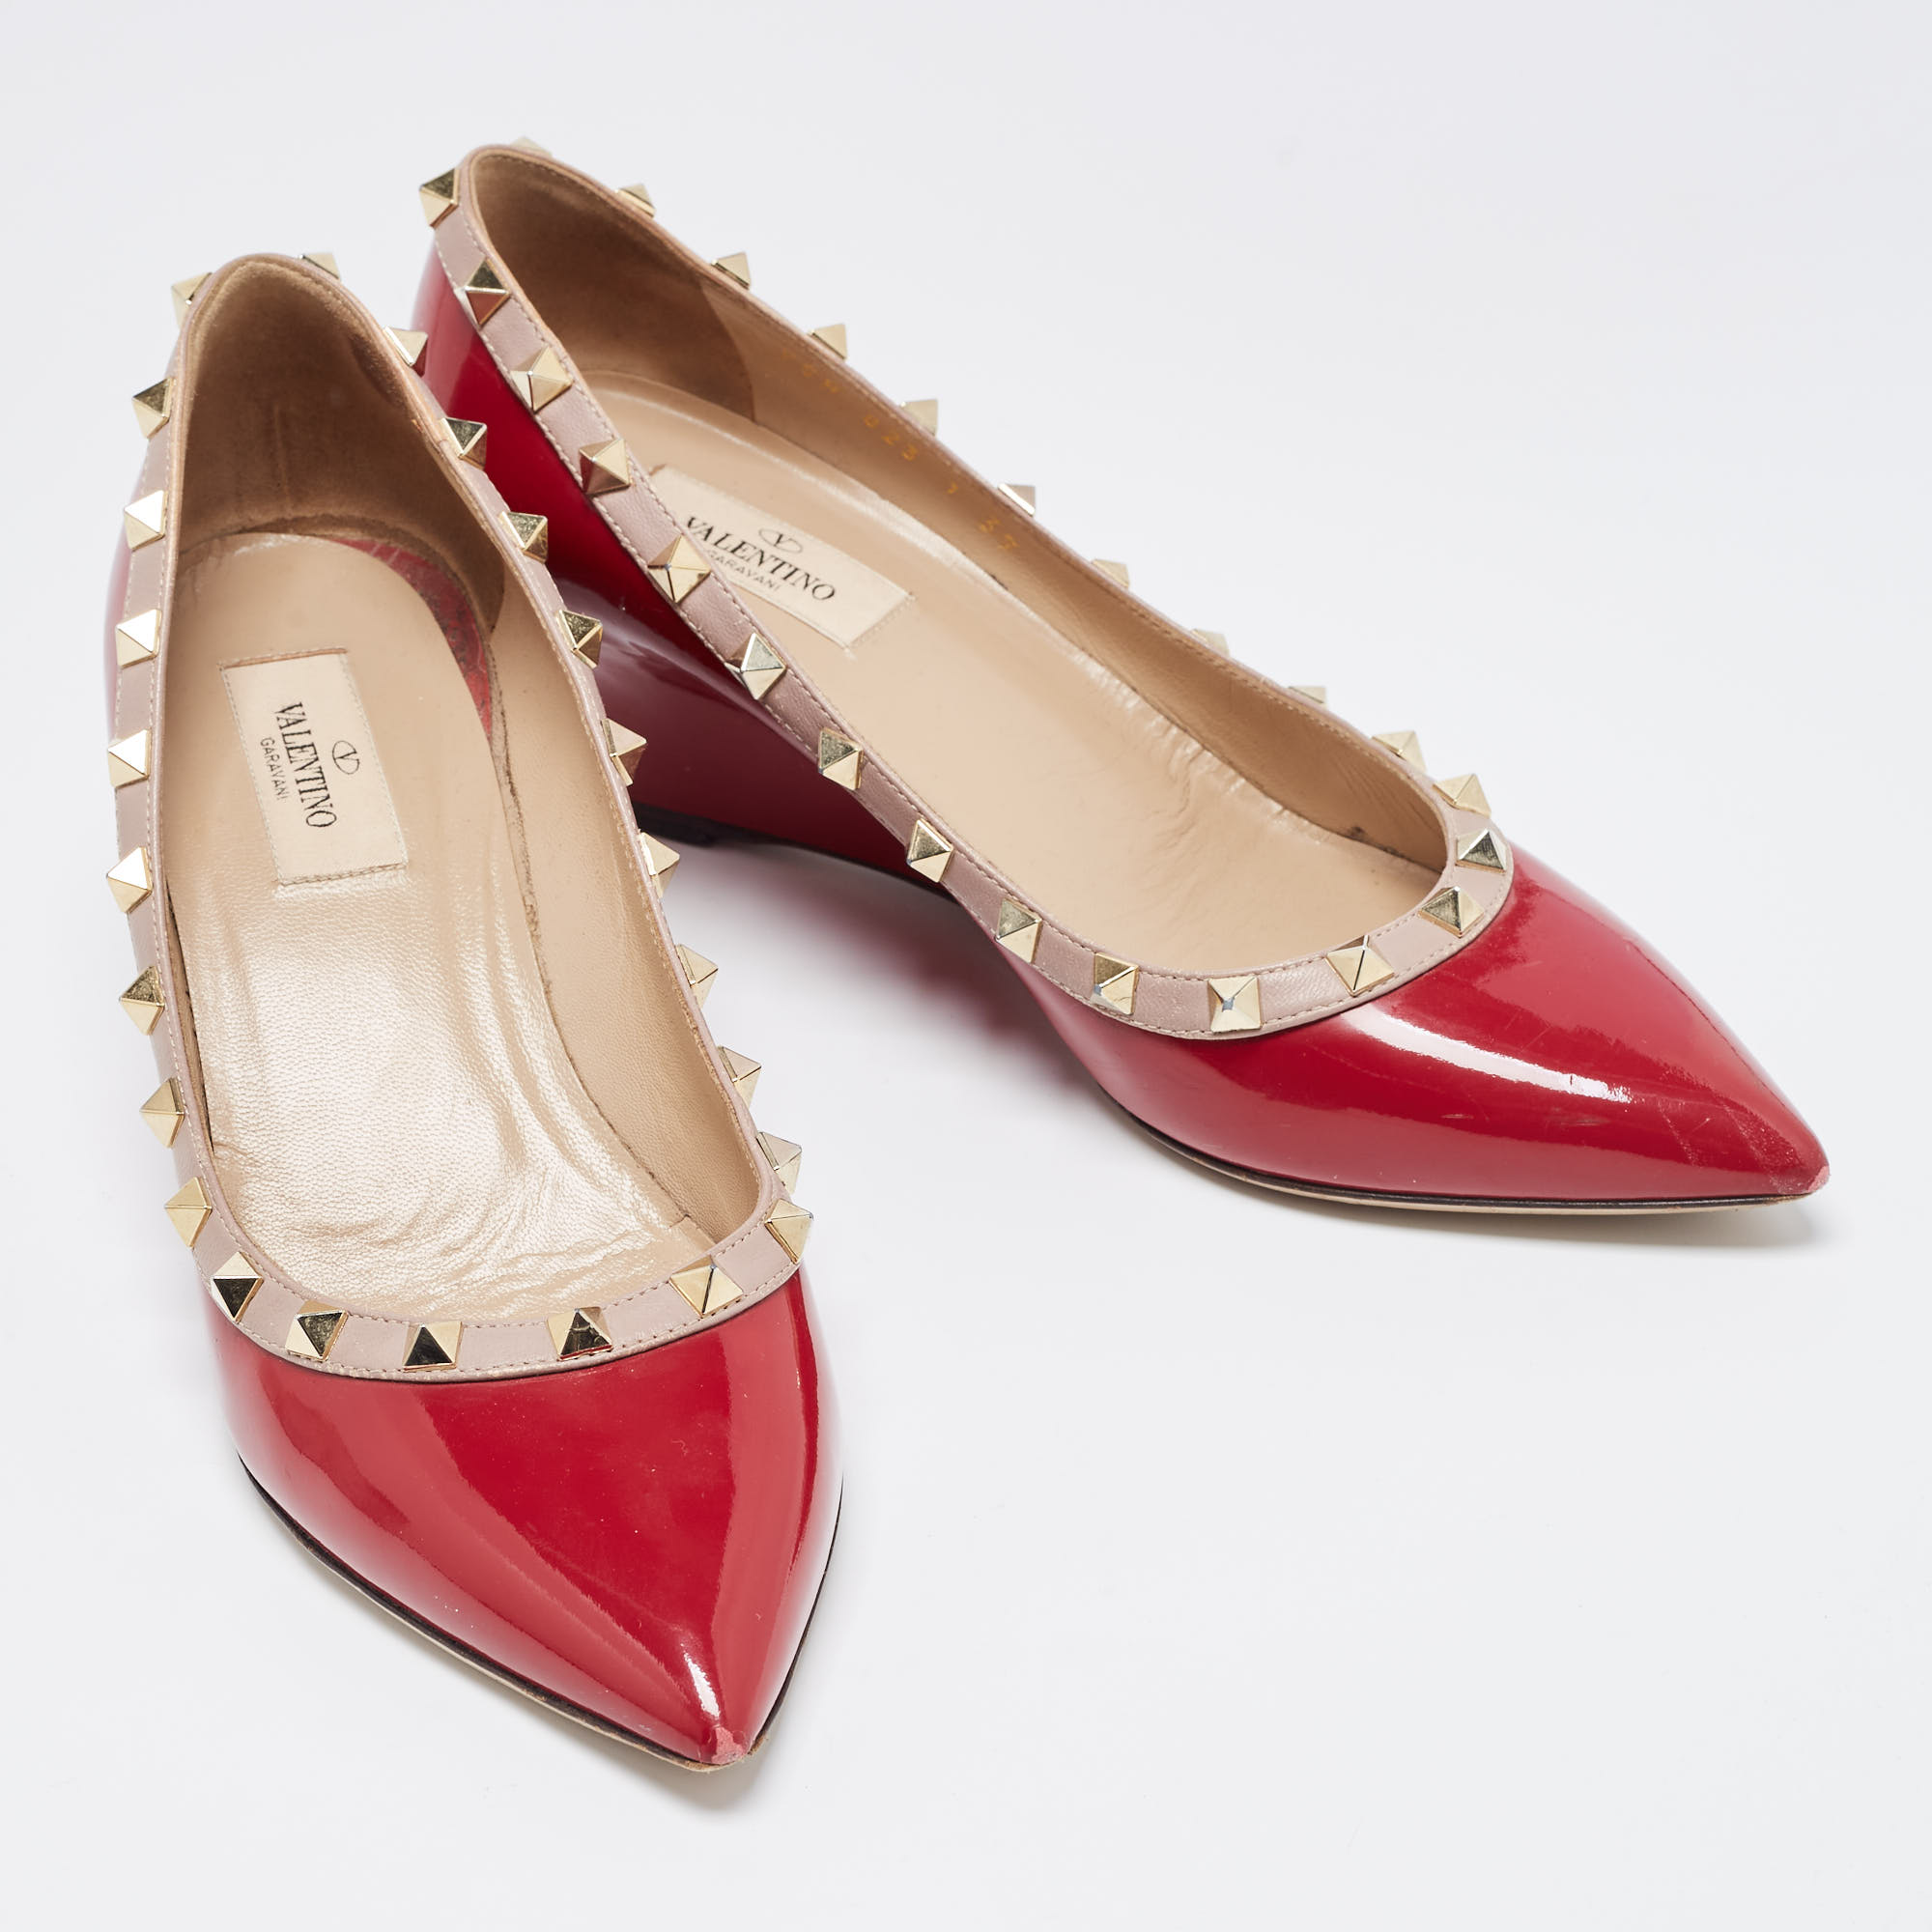 Valentino Red/Beige Patent And Leather Wedge Rockstud Pumps Size 39